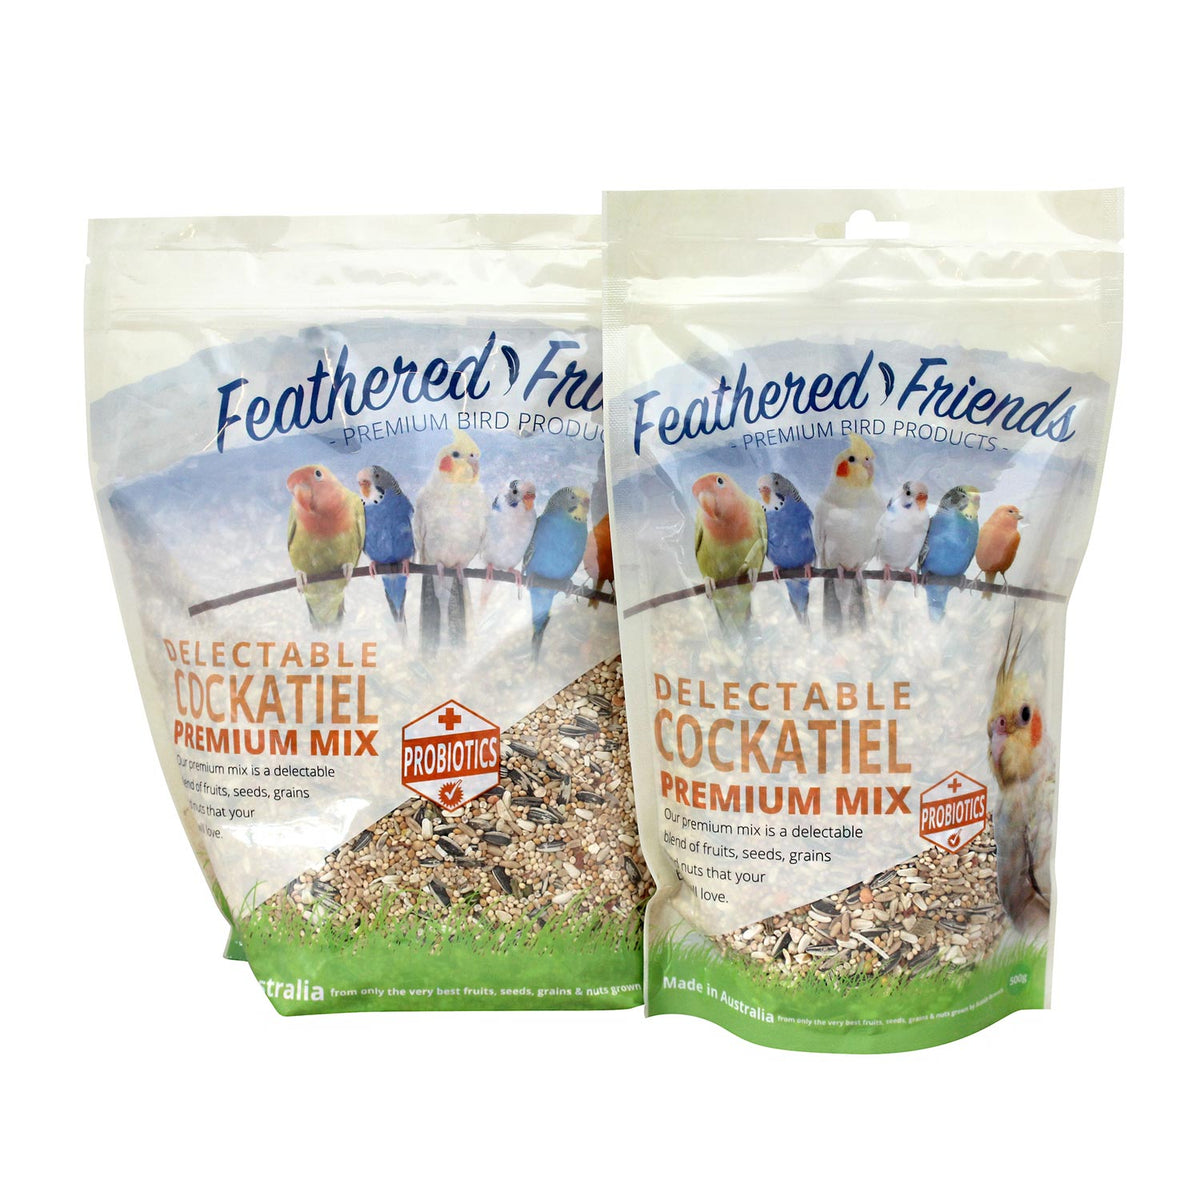 Feathered Friends Delectable Cockatiel Premium Mix